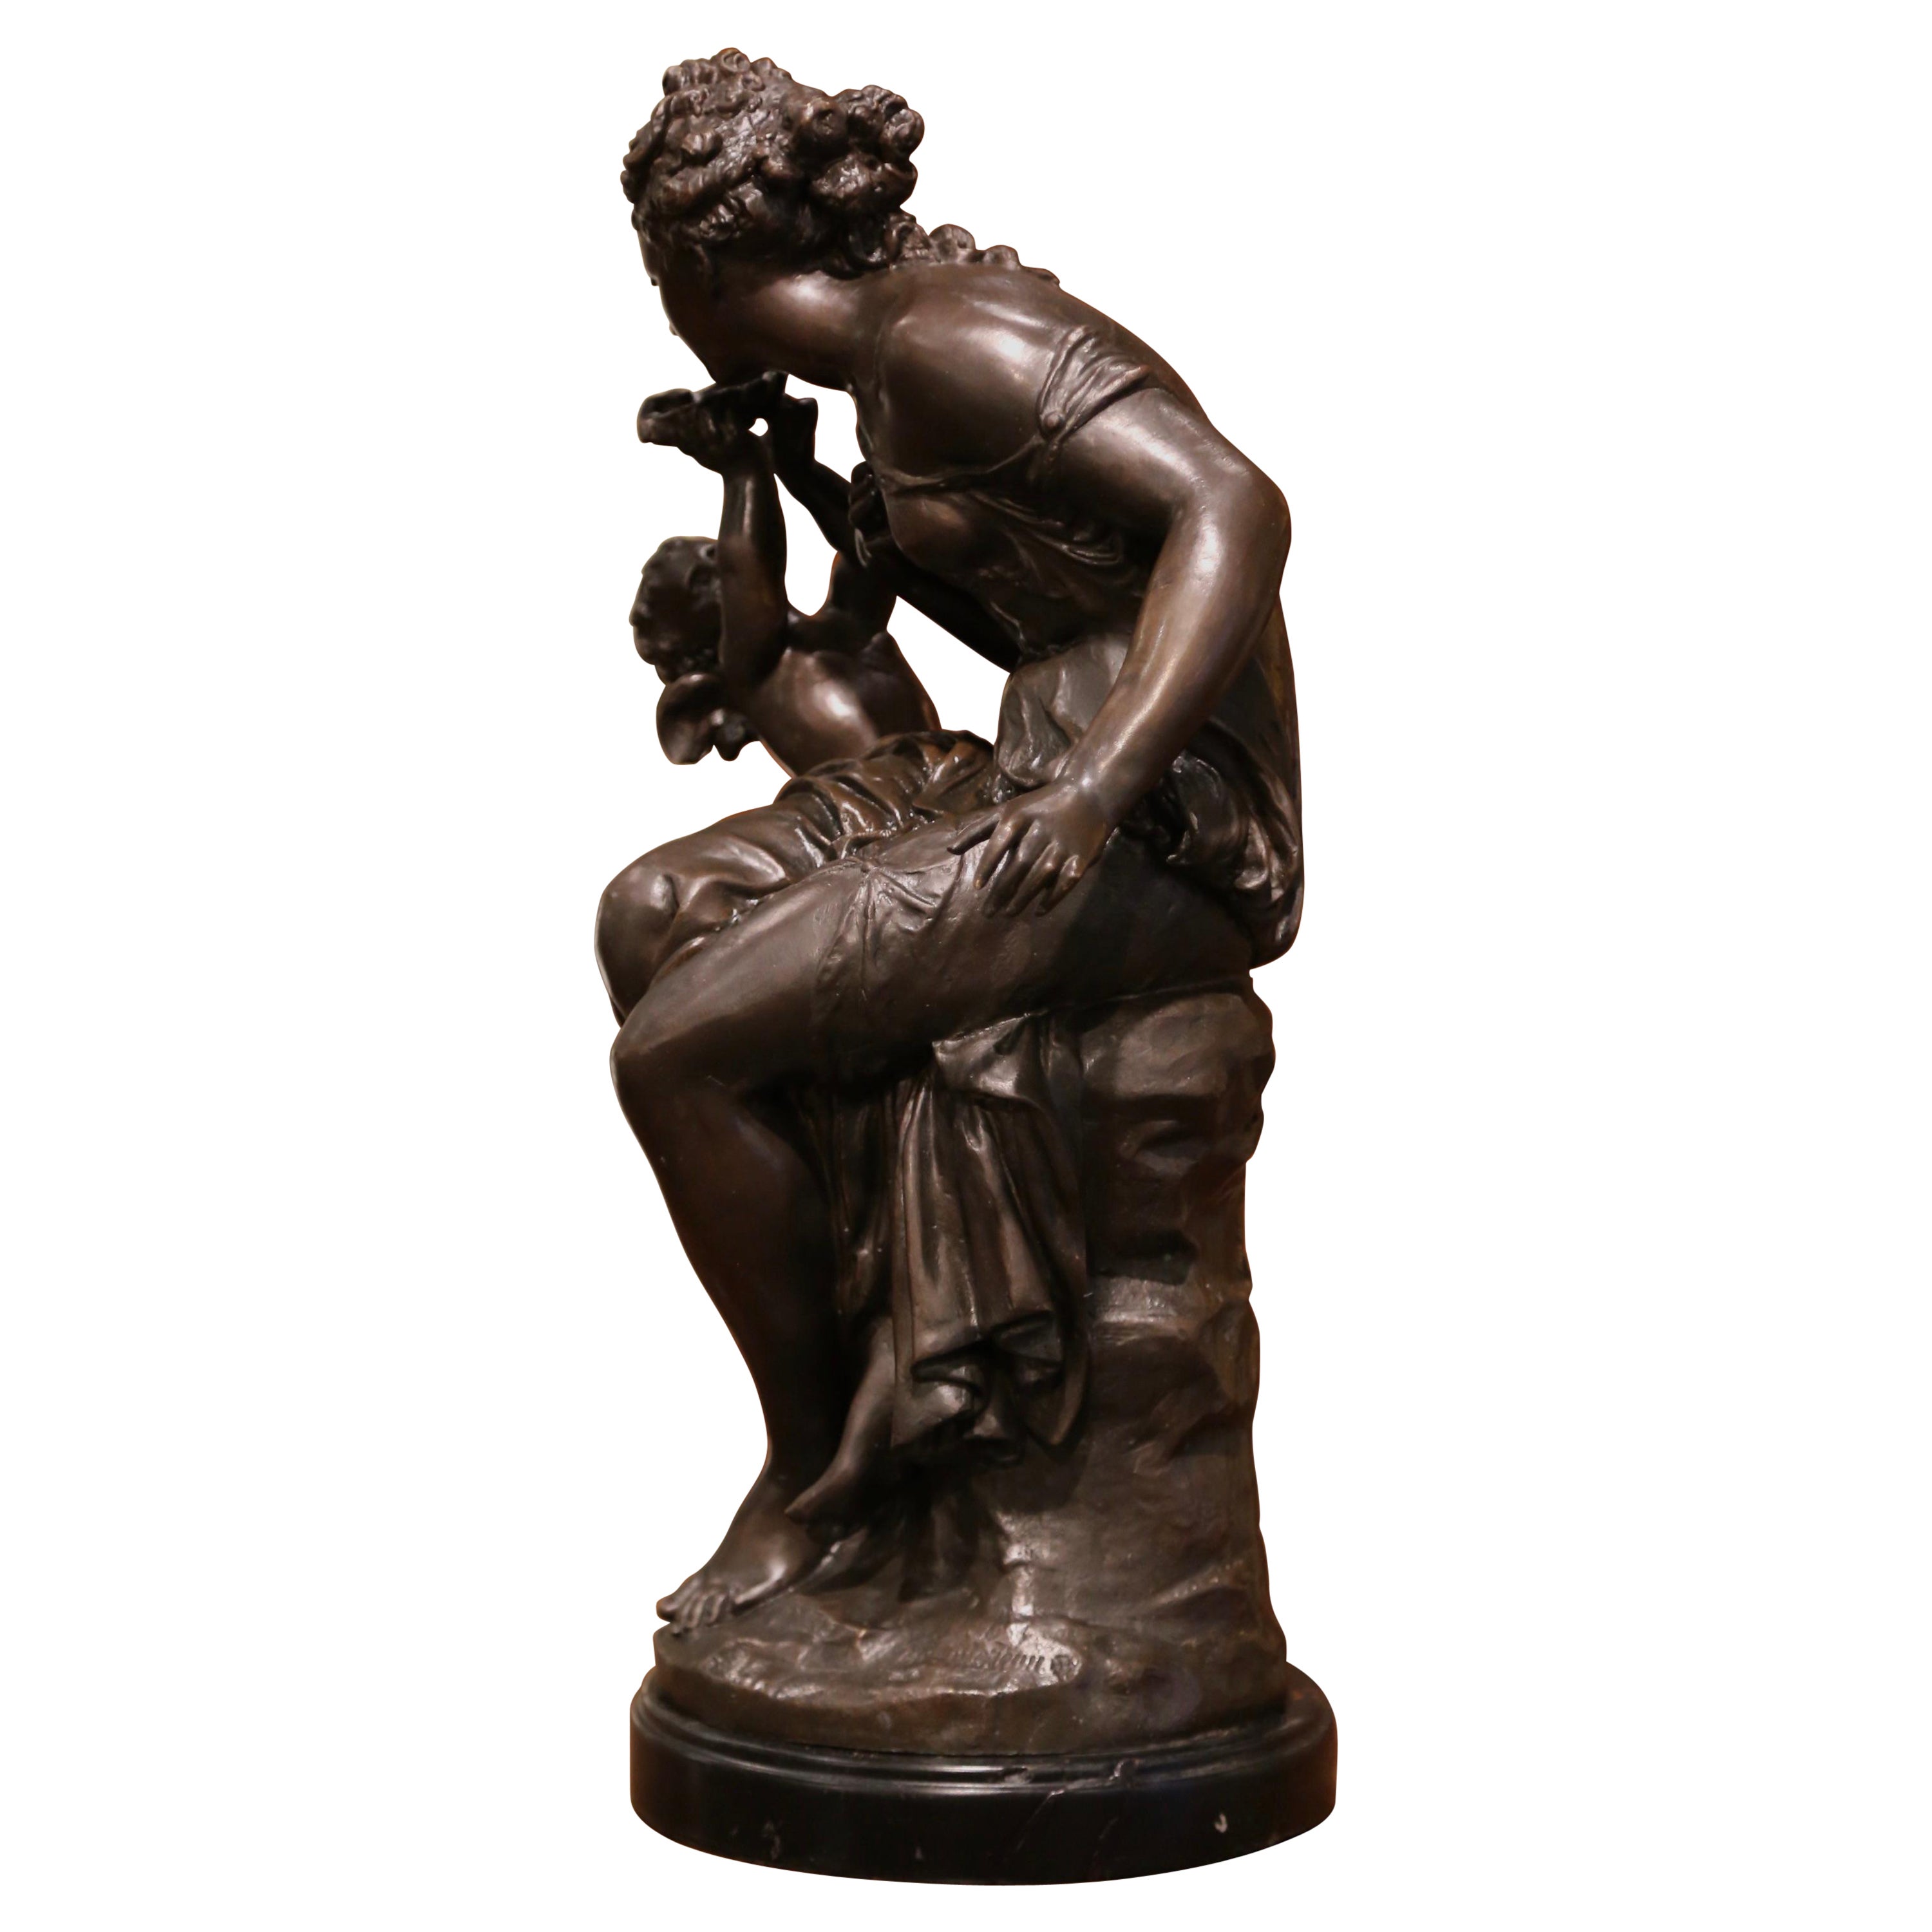 This elegant allegorical figure composition was crafted in France circa 1880; built of bronze, the statue stands on a circular black marble base, and depicts a female beauty seated on a trunk with a winged angel by her side. The tall composition